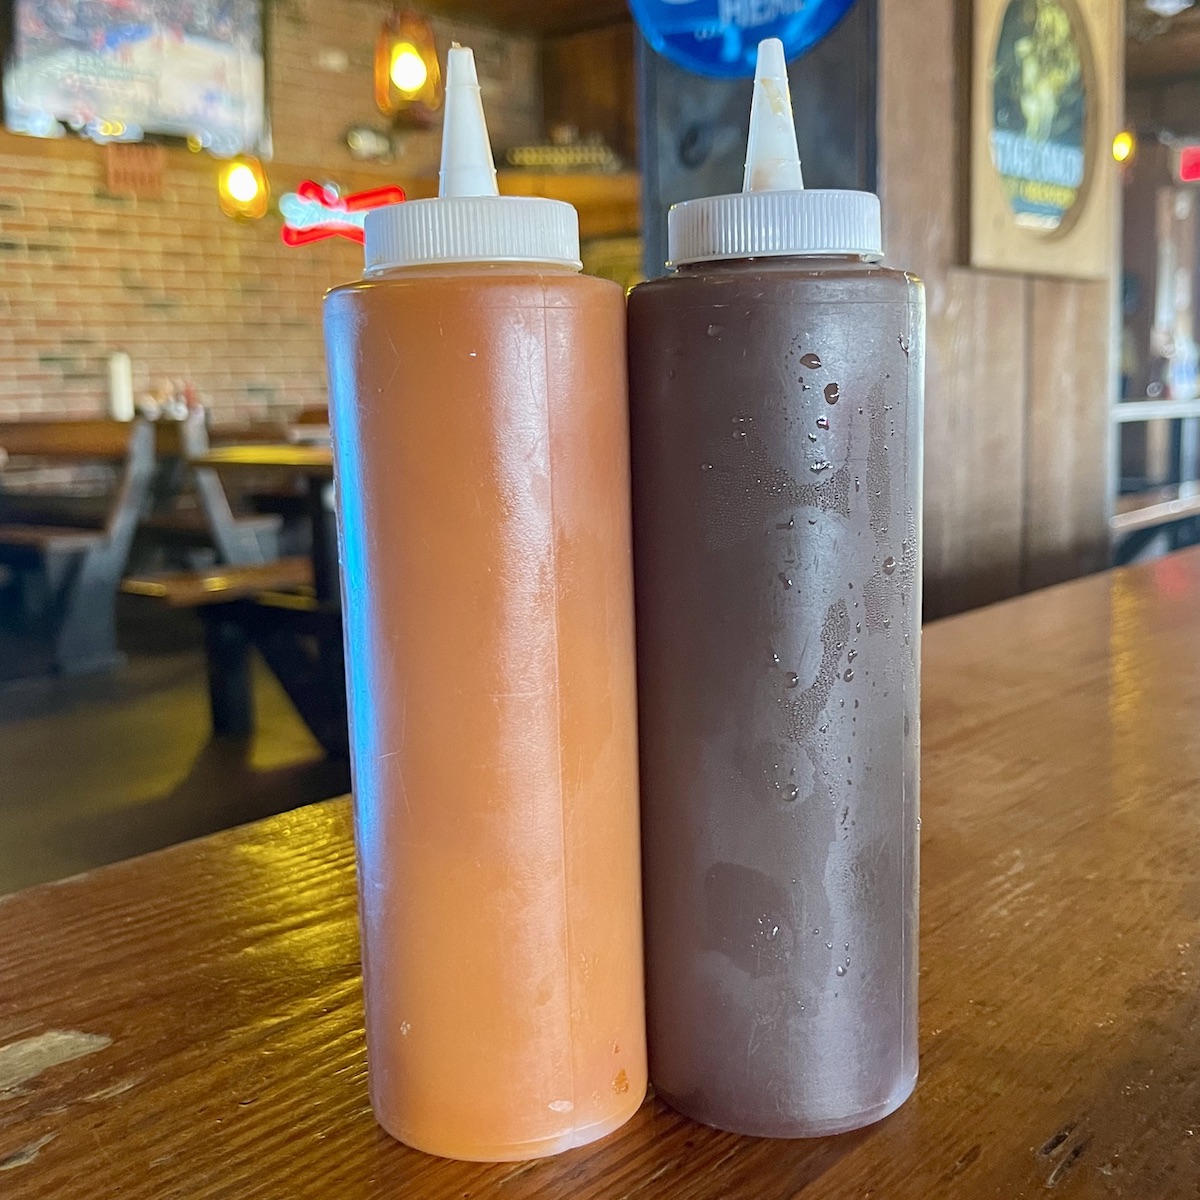 Hot Sauce and BBQ Sauce from Shorty's BBQ in Miami, Florida